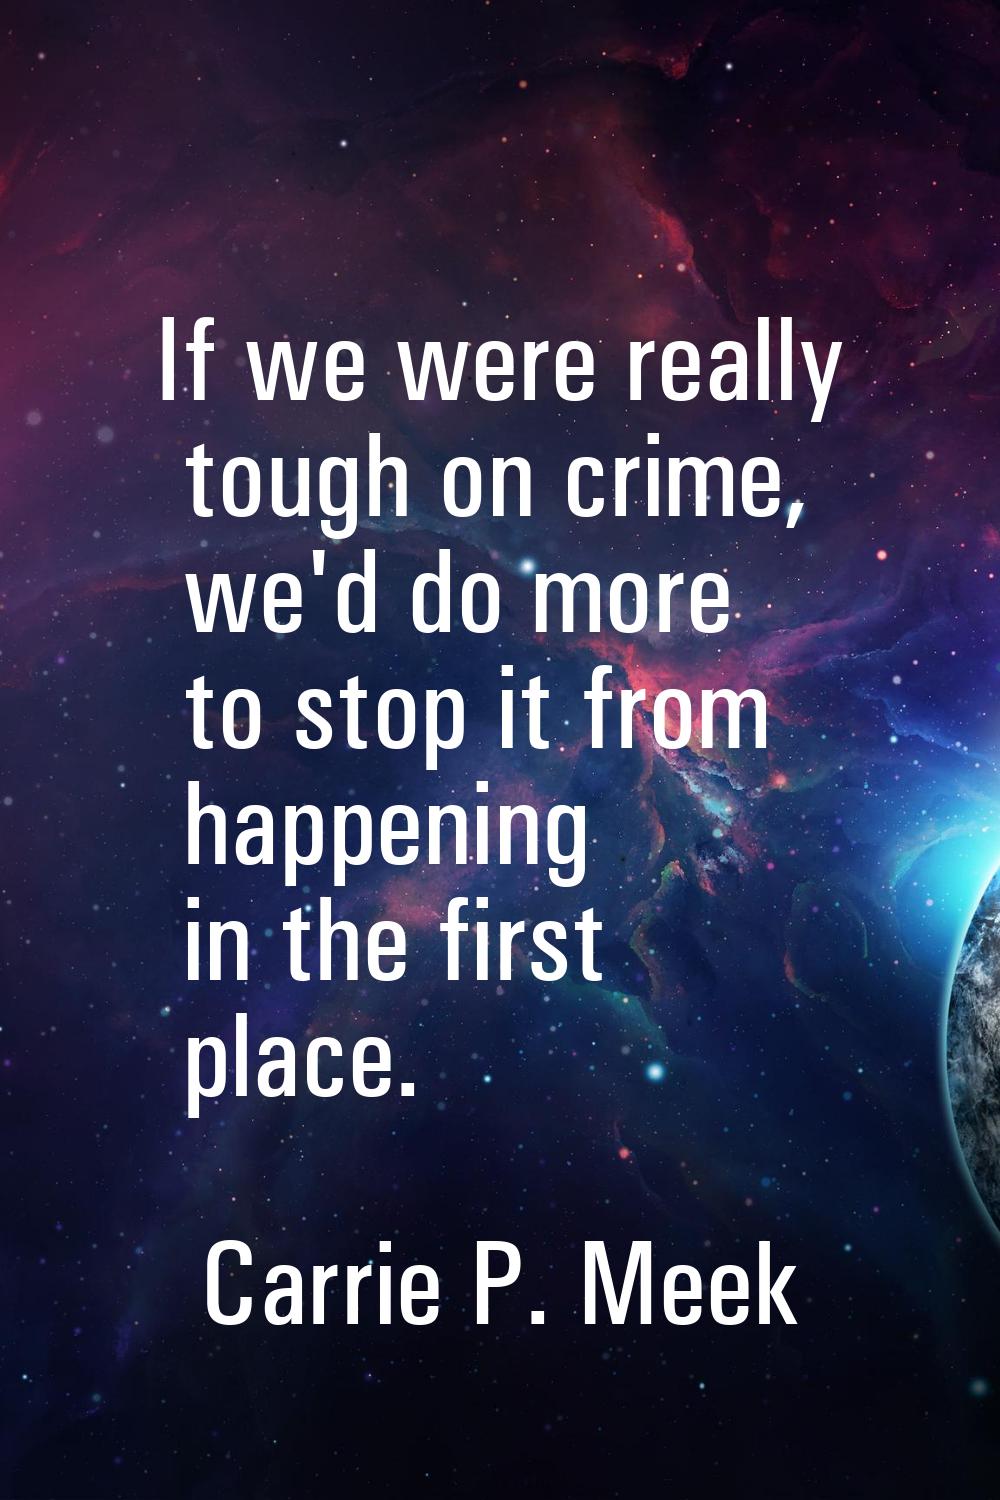 If we were really tough on crime, we'd do more to stop it from happening in the first place.